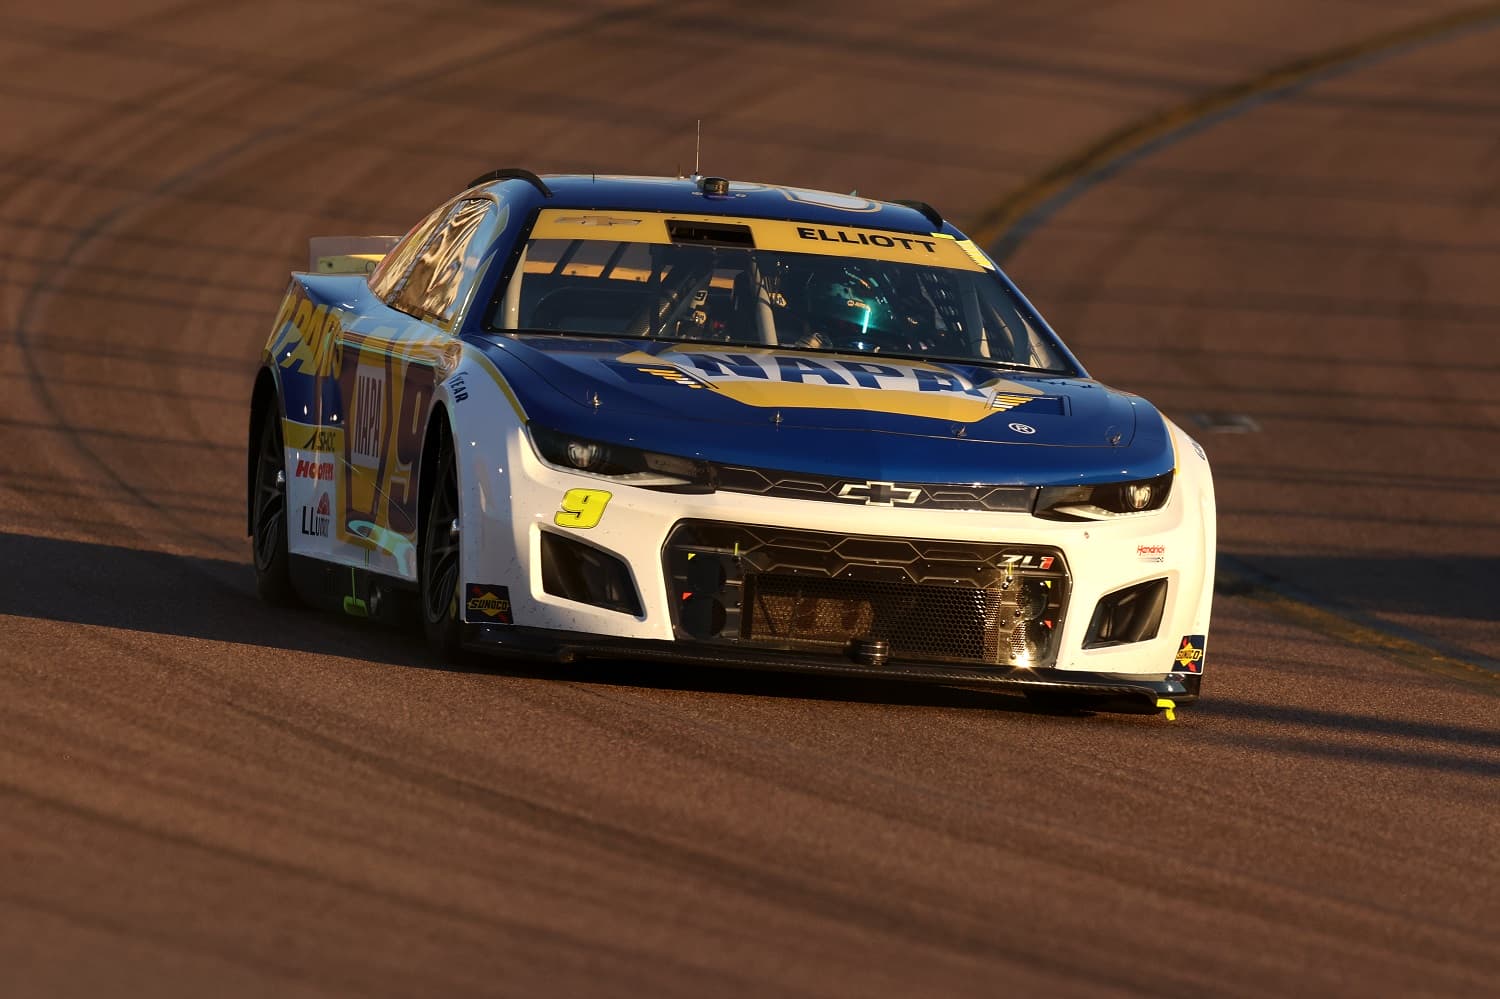 Chase Elliott, driver of the #9 NAPA Auto Parts Chevrolet Camaro, drives during practice for the NASCAR Cup Series Championship at Phoenix Raceway on Nov. 4, 2022. | Christian Petersen/Getty Images